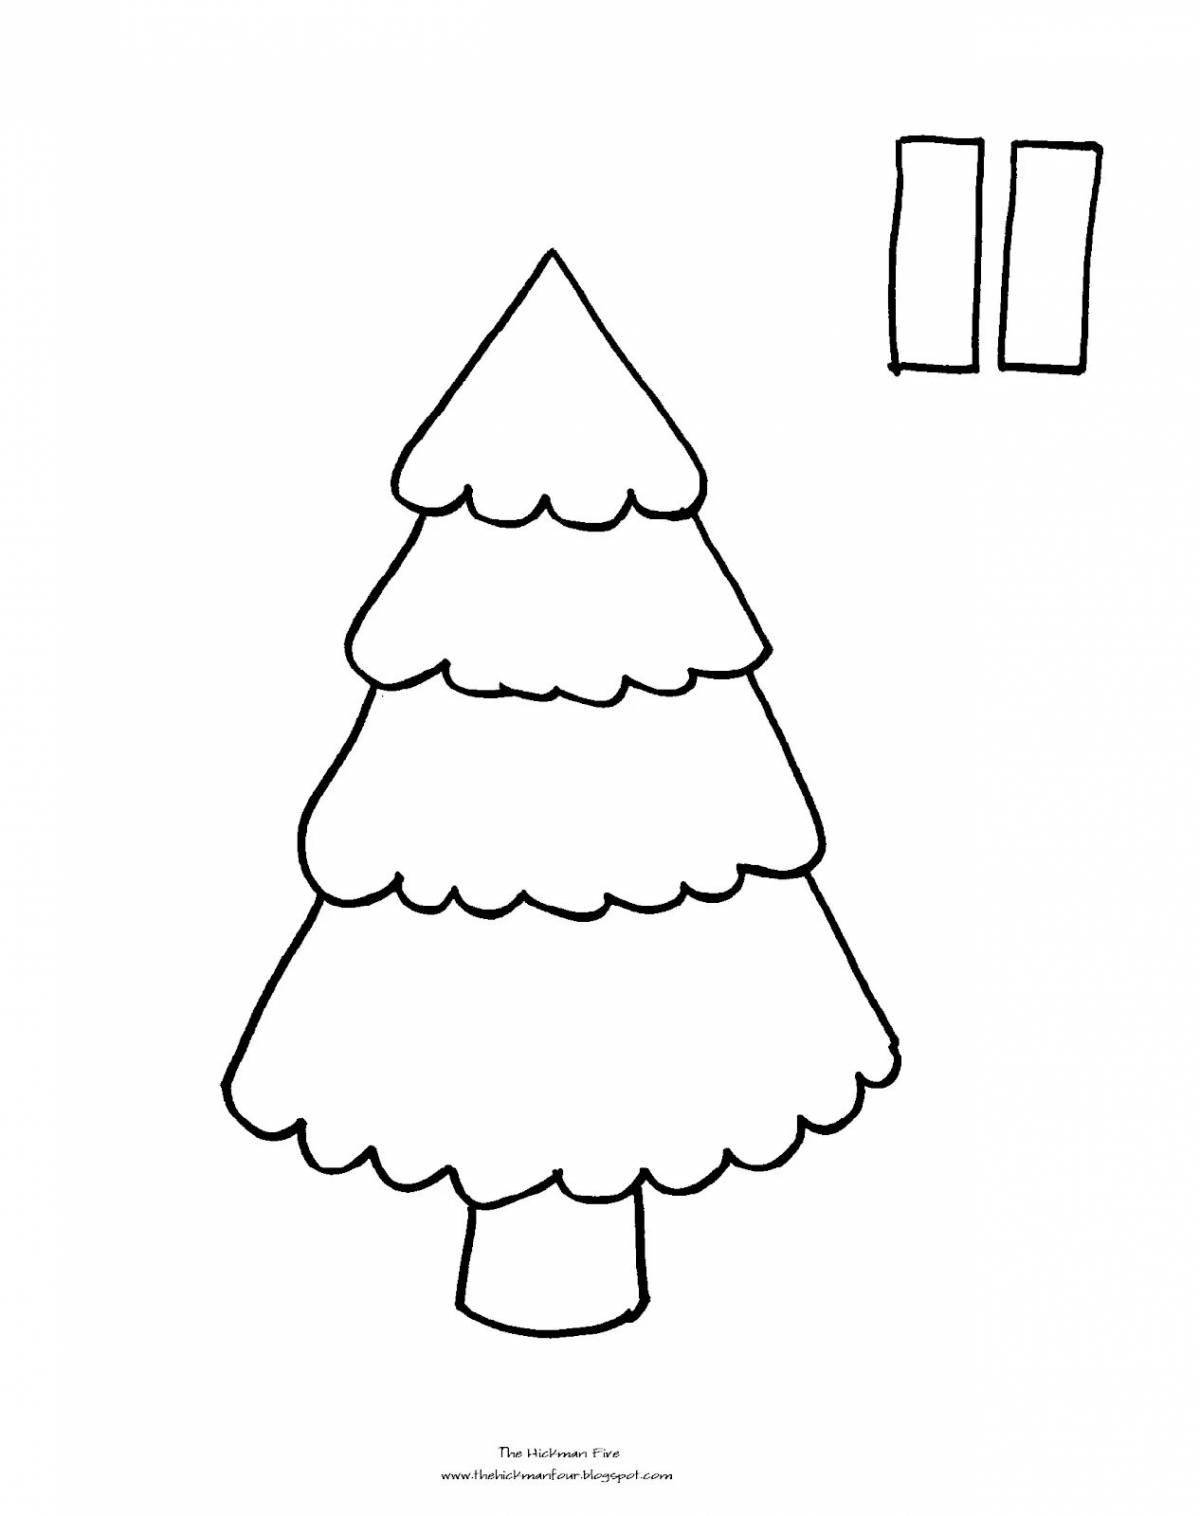 Exquisite Christmas coloring book for kids